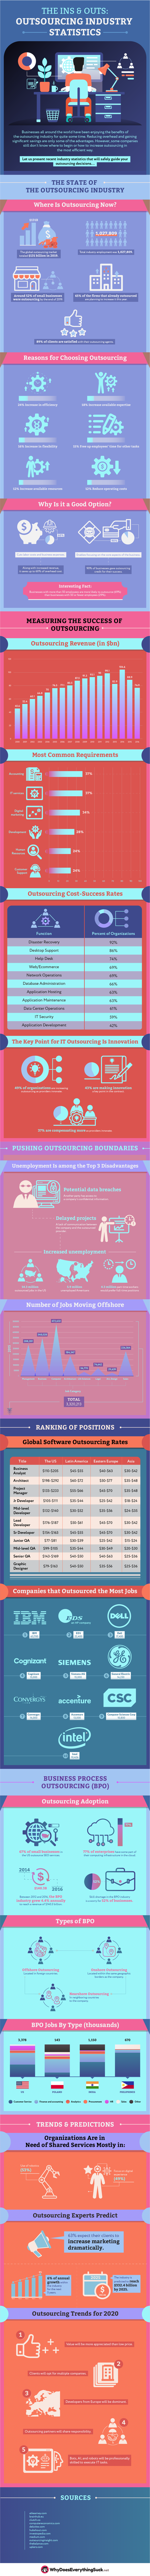 Outsourcing Statistics Infographic